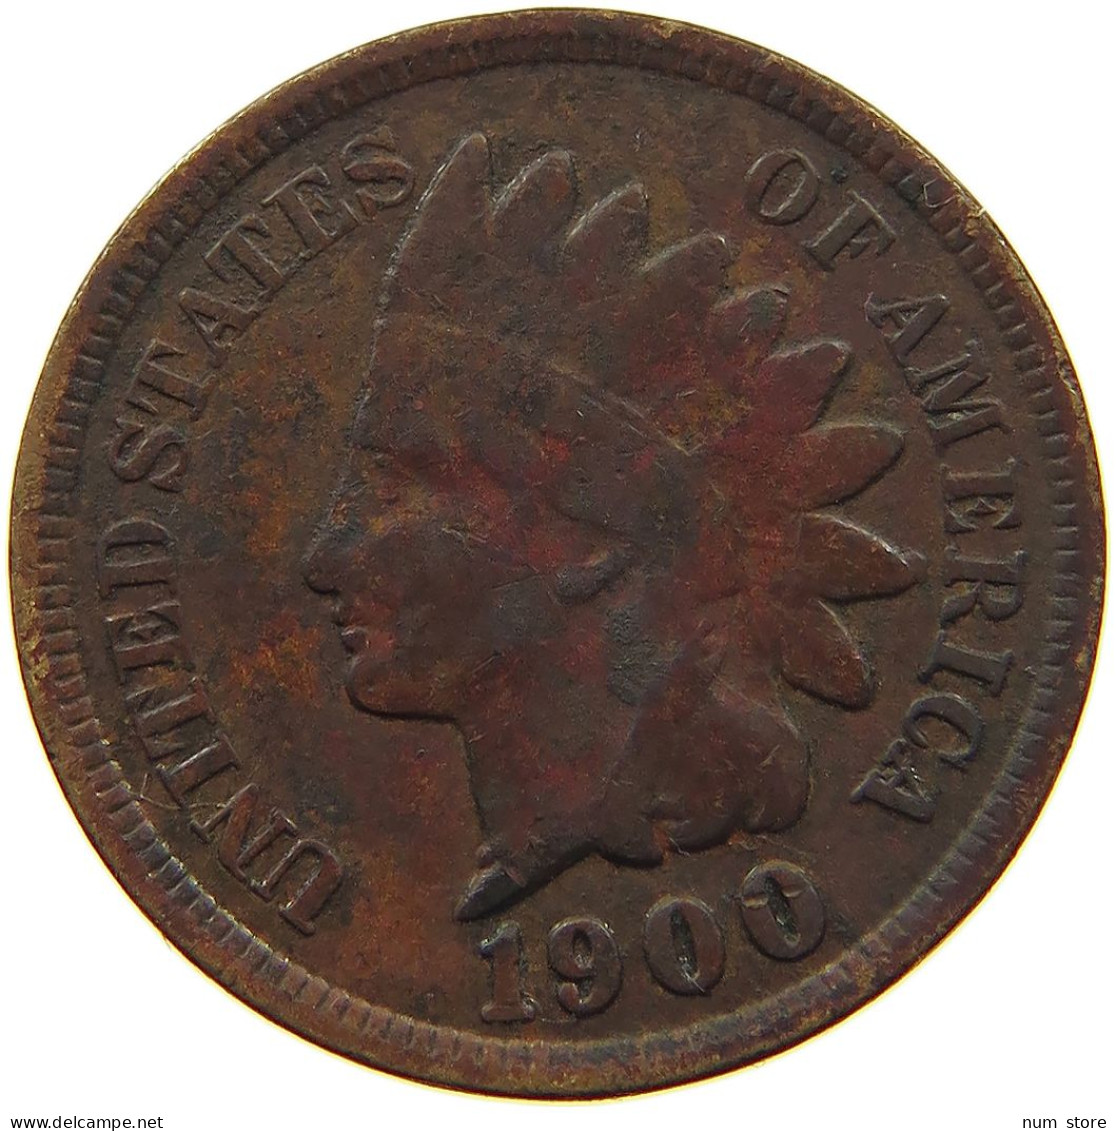 UNITED STATES OF AMERICA CENT 1900 INDIAN HEAD #c083 0635 - 1859-1909: Indian Head